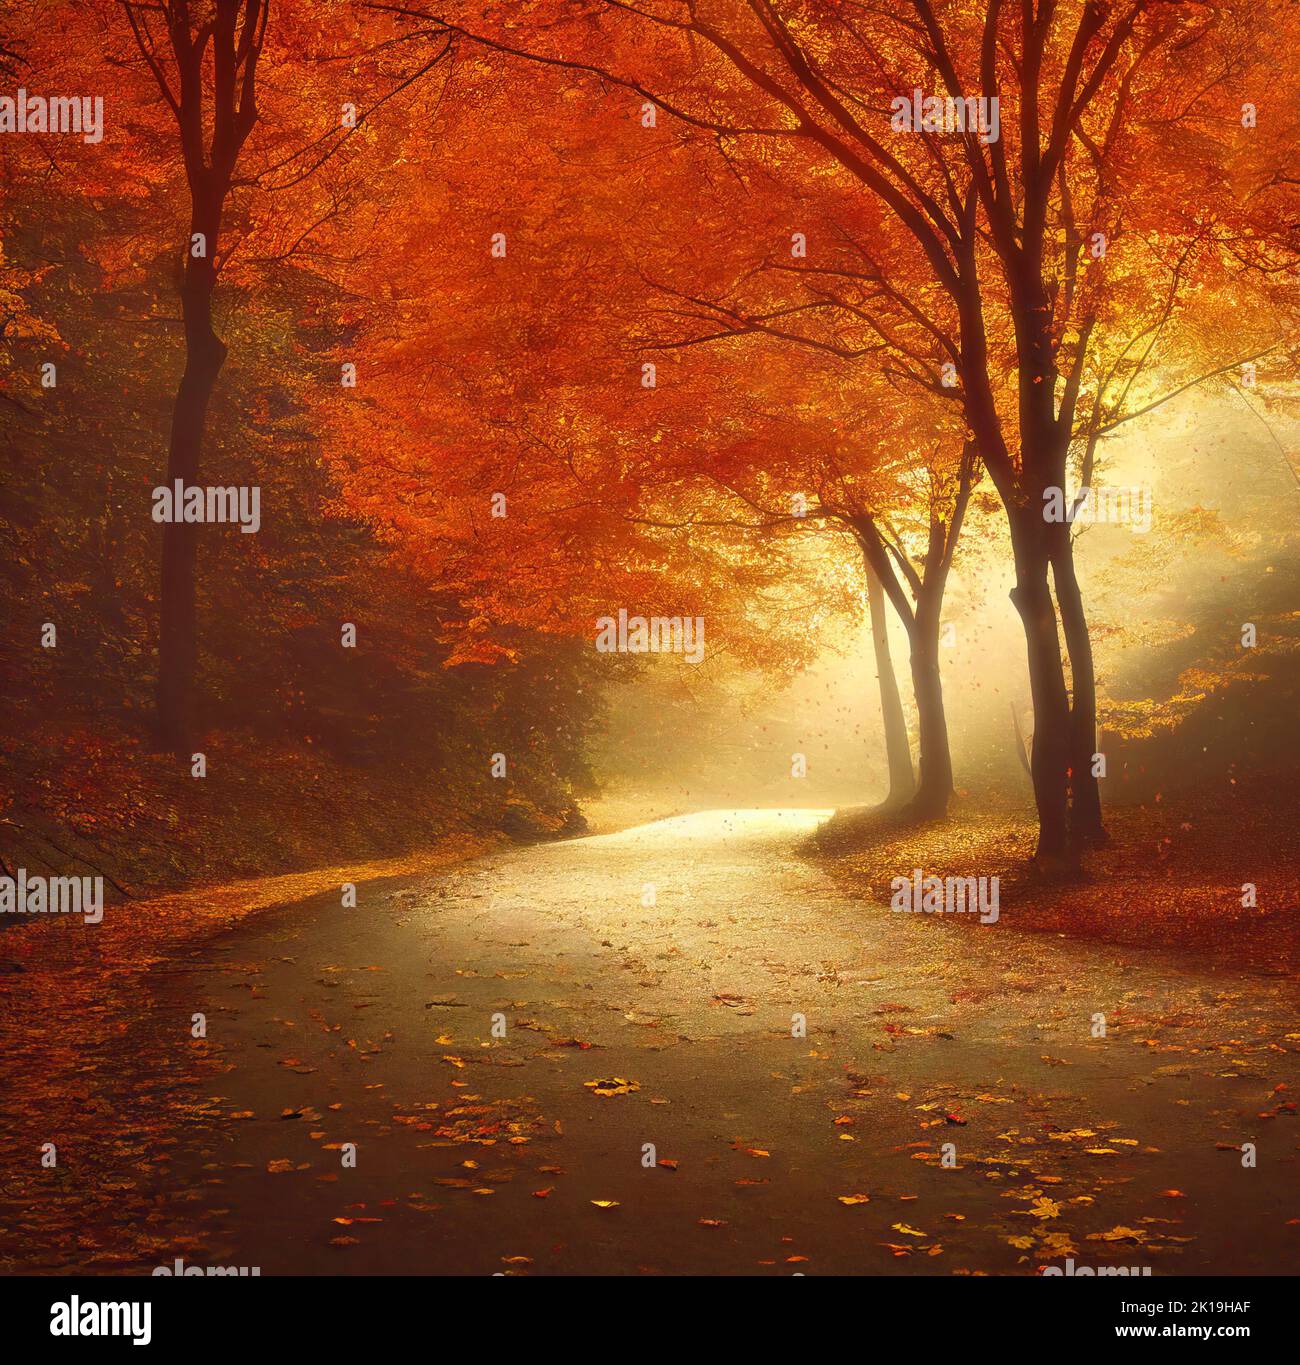 Misty morning in autumn park, red maple trees along an alley, square format. Digital illustration based on render by neural network Stock Photo